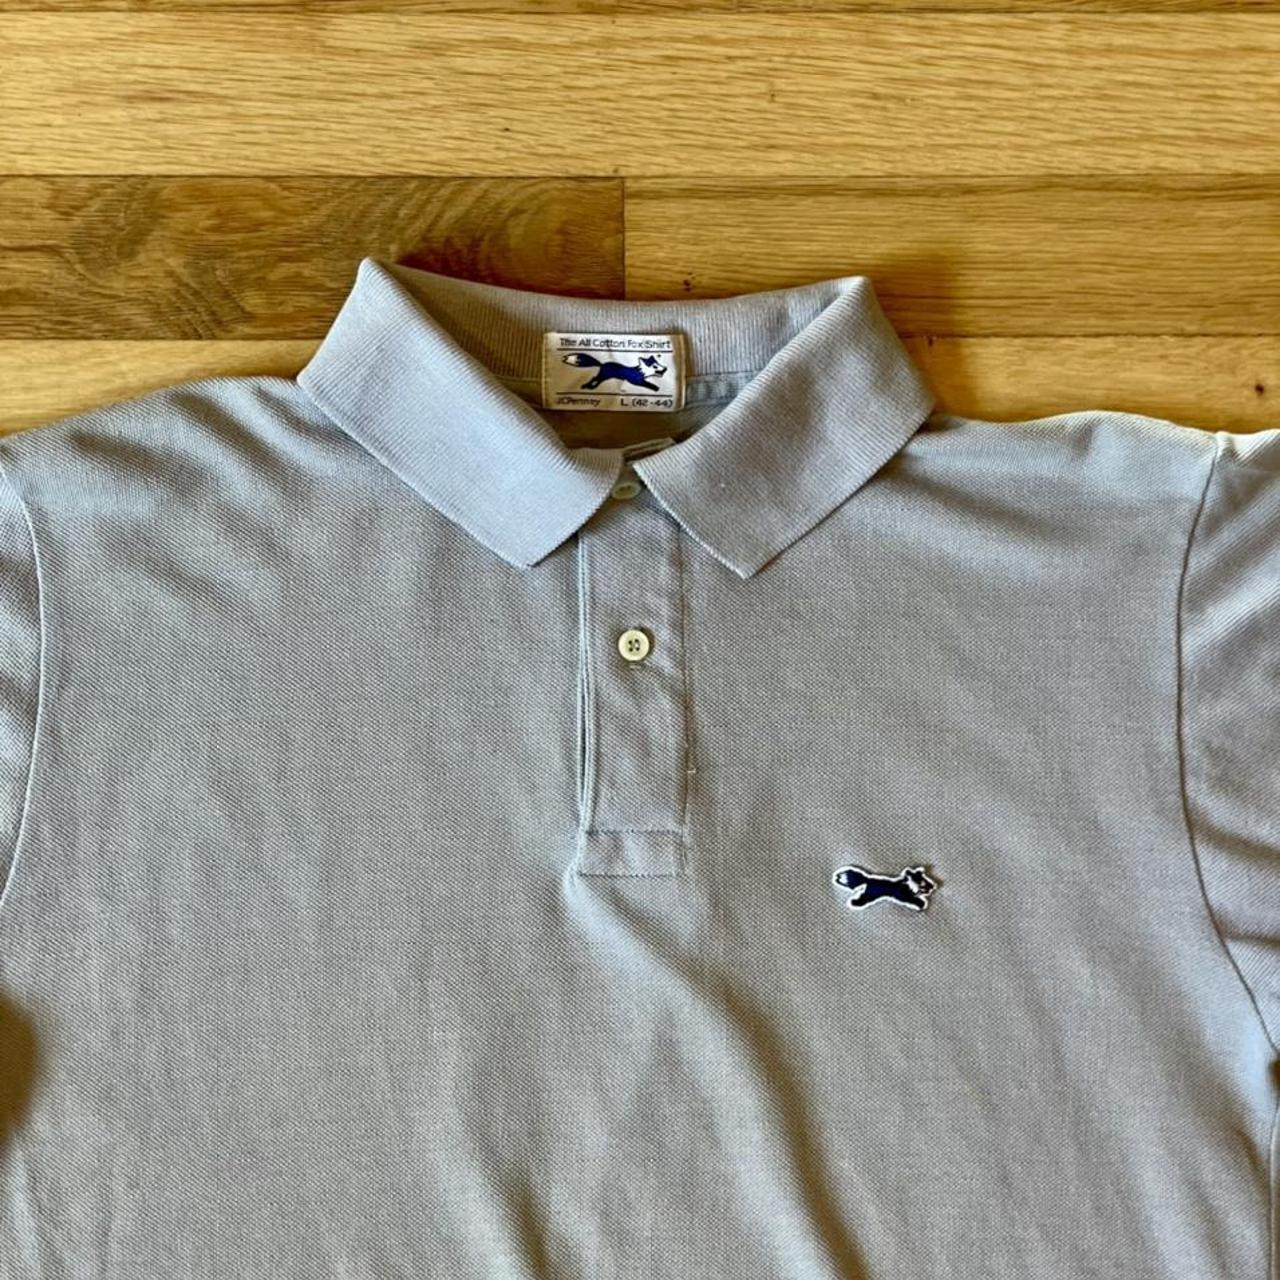 GREY JC PENNEY POLO SHIRT WITH THE BLUE EMBROIDERED... - Depop